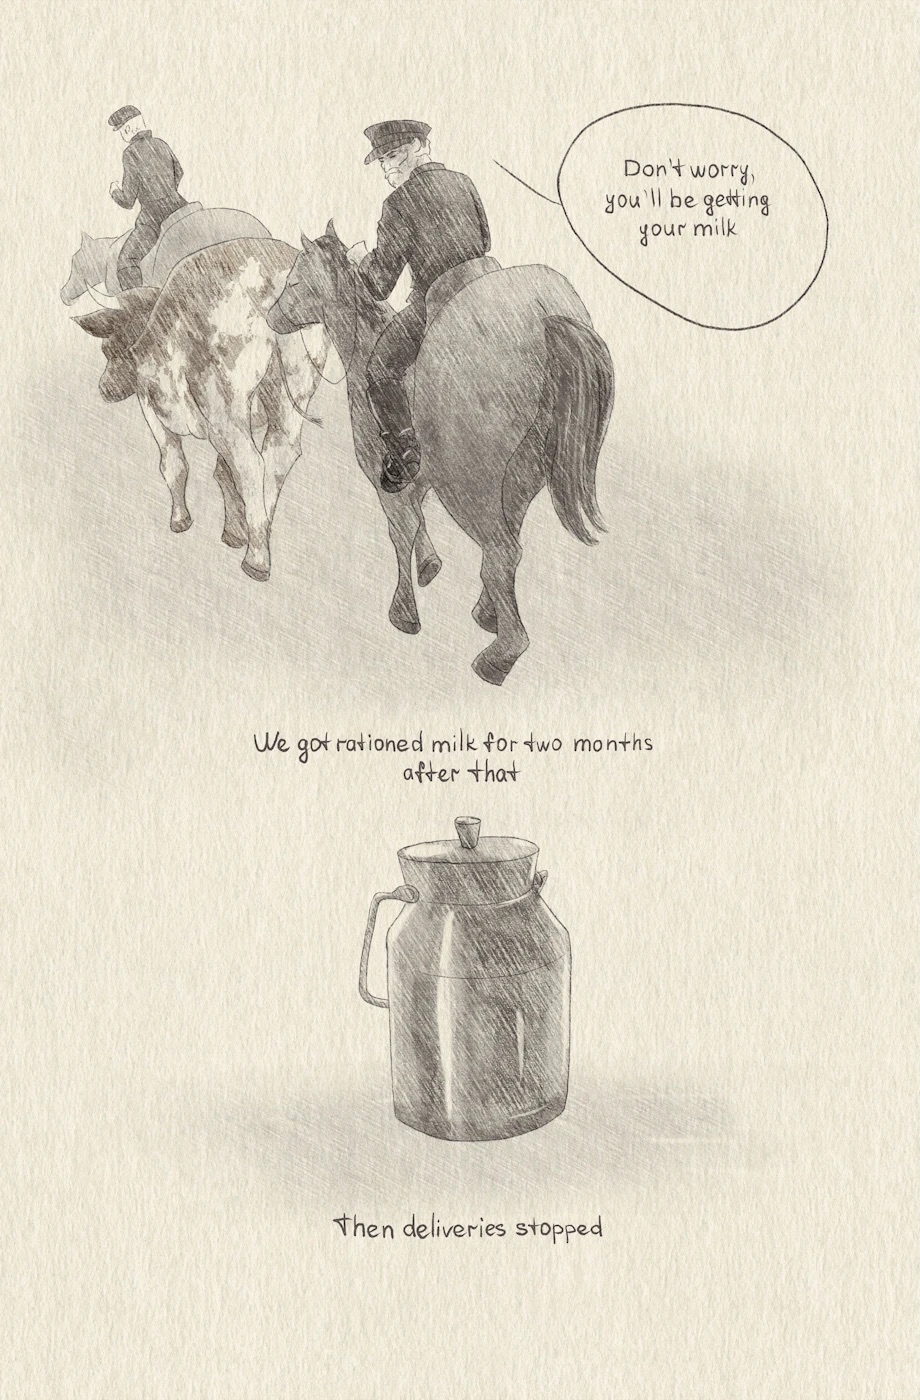 The two authority figures ride off on horseback with the cow. One says, â€œDonâ€™t worry, youâ€™ll be getting your milk.â€
â€œWe got rationed milk for two months after that. Then deliveries stopped.â€
A lone silver milk jug sits at the center of the borderless panel